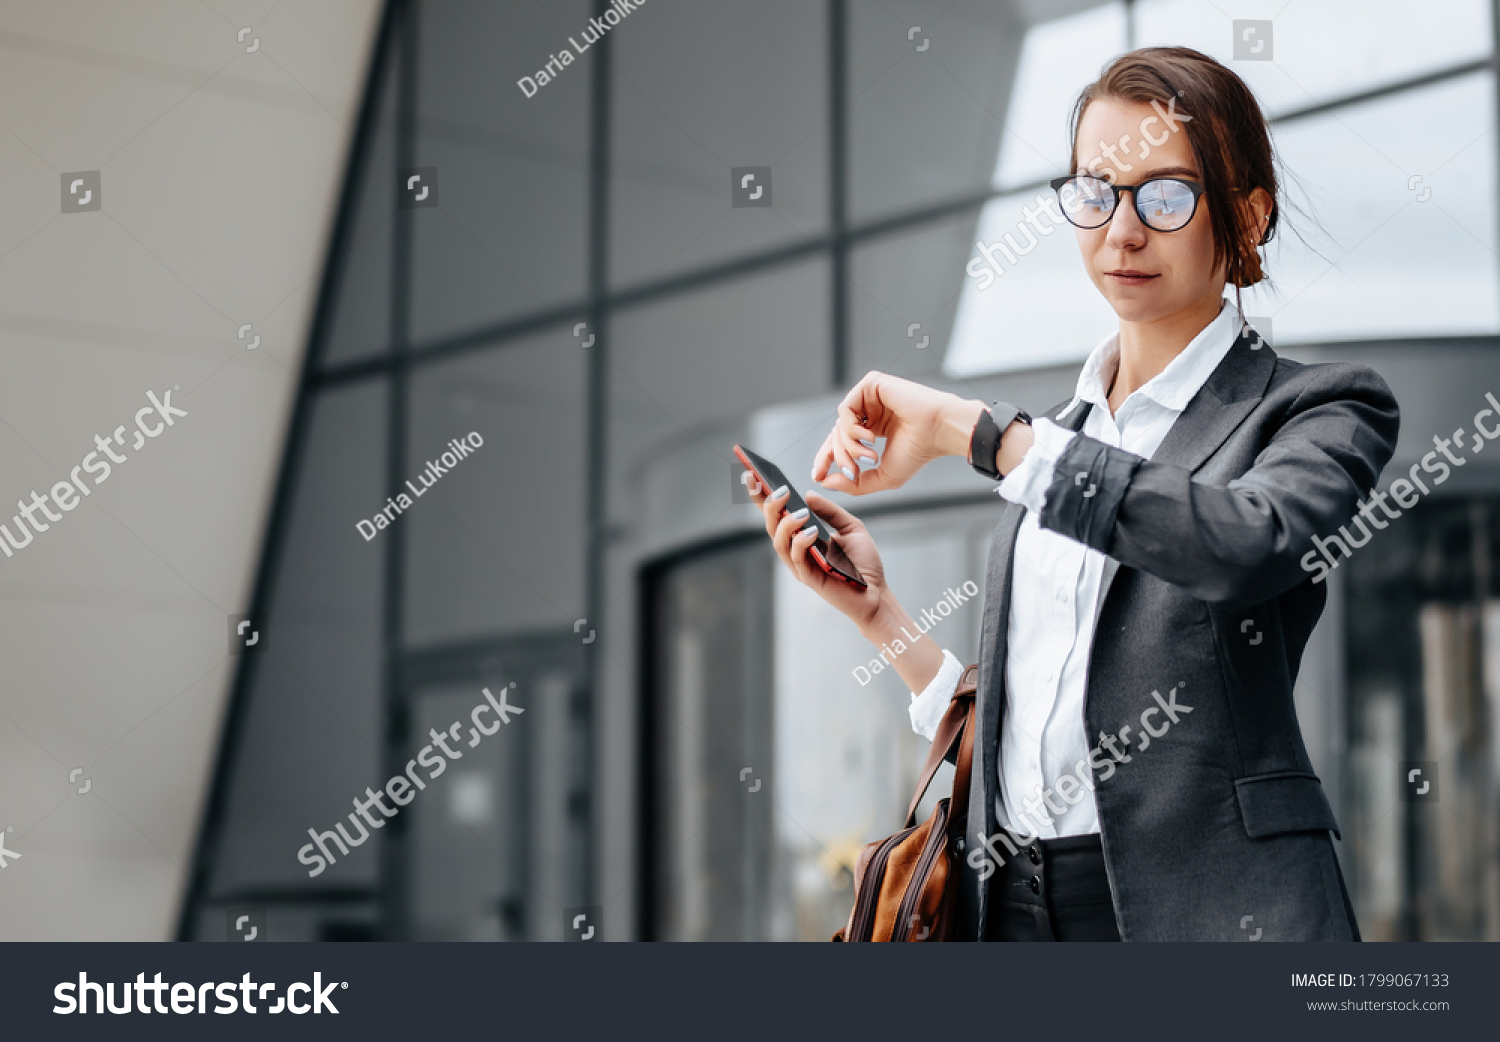 A business woman checks the time in the city during a working day waiting for a meeting. Discipline and timing. An employee goes towards a corporate meeting. #1799067133